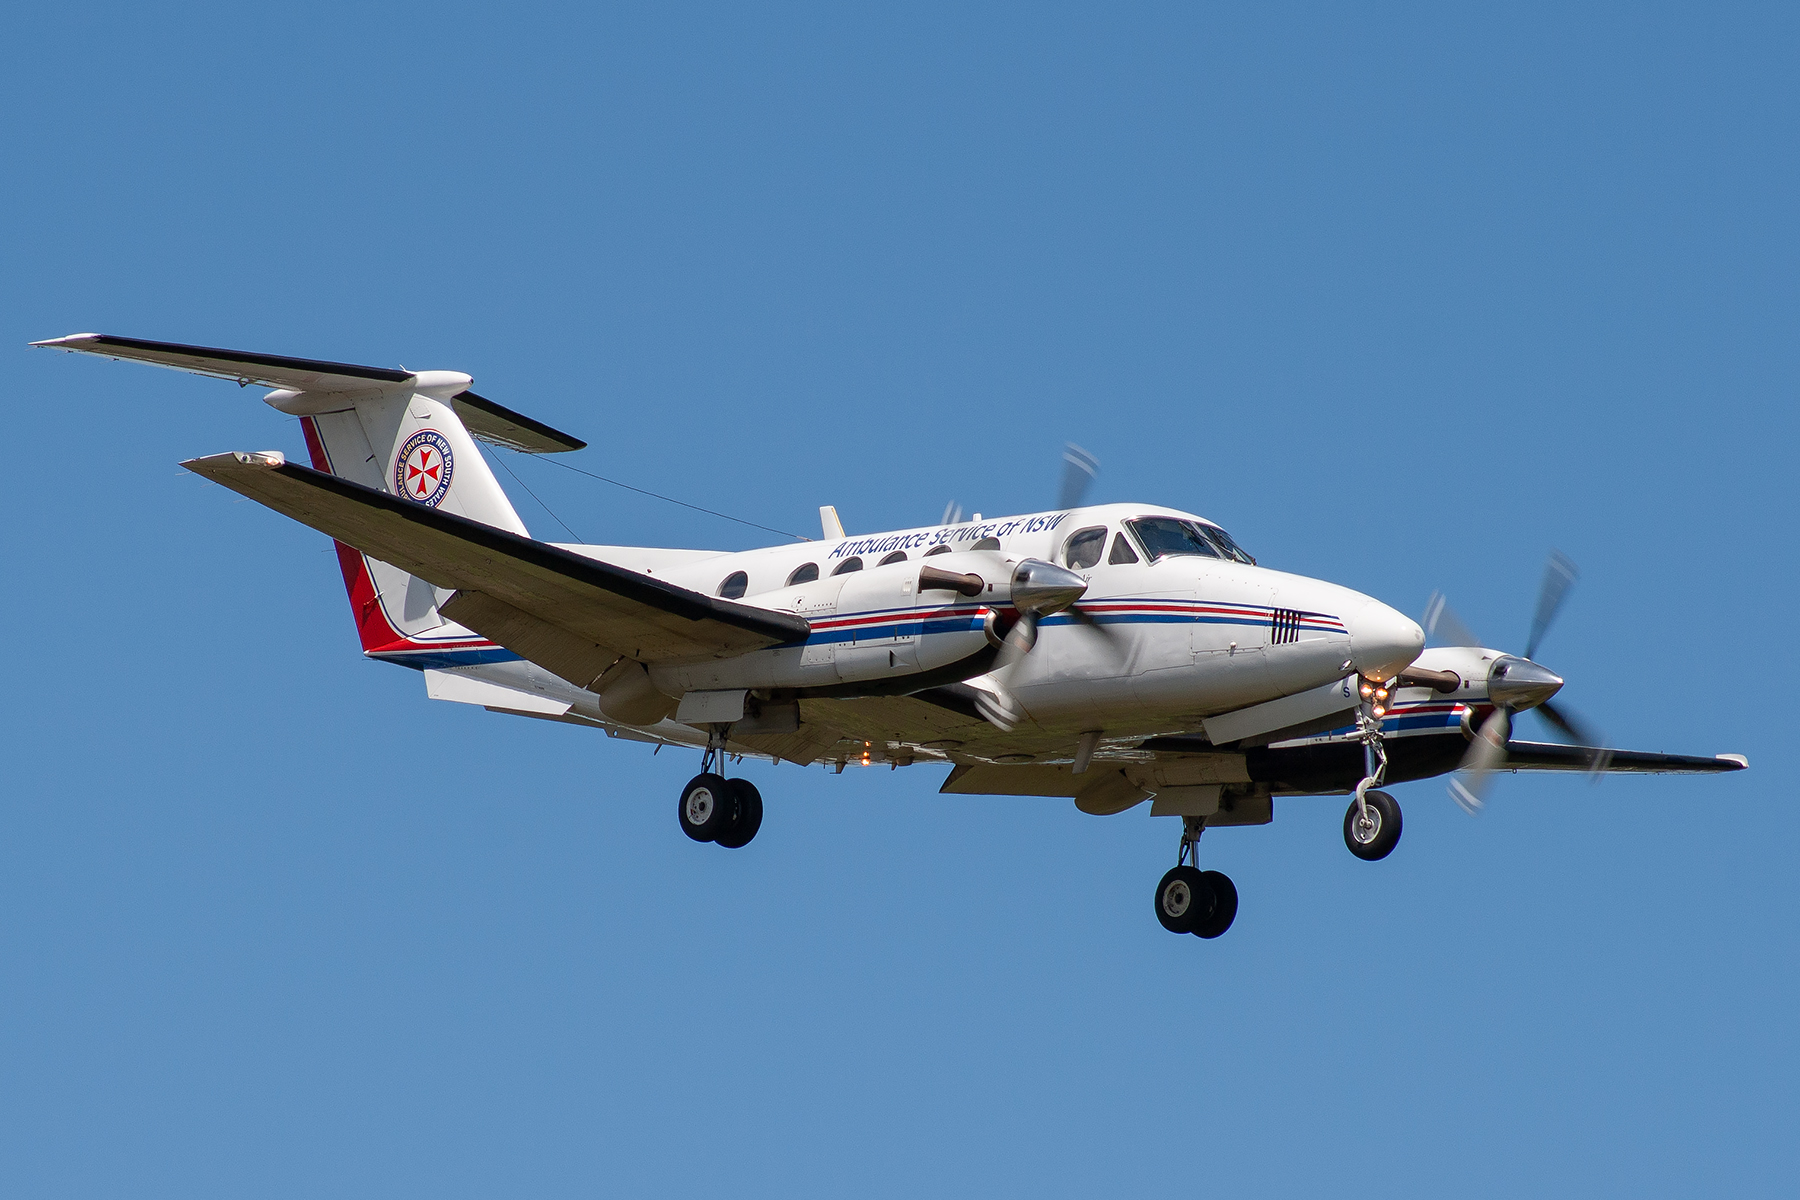 RFDS - Royal Flying Doctor Service (South Eastern Section) Beech King Air B200 VH-MVS at Kingsford Smith